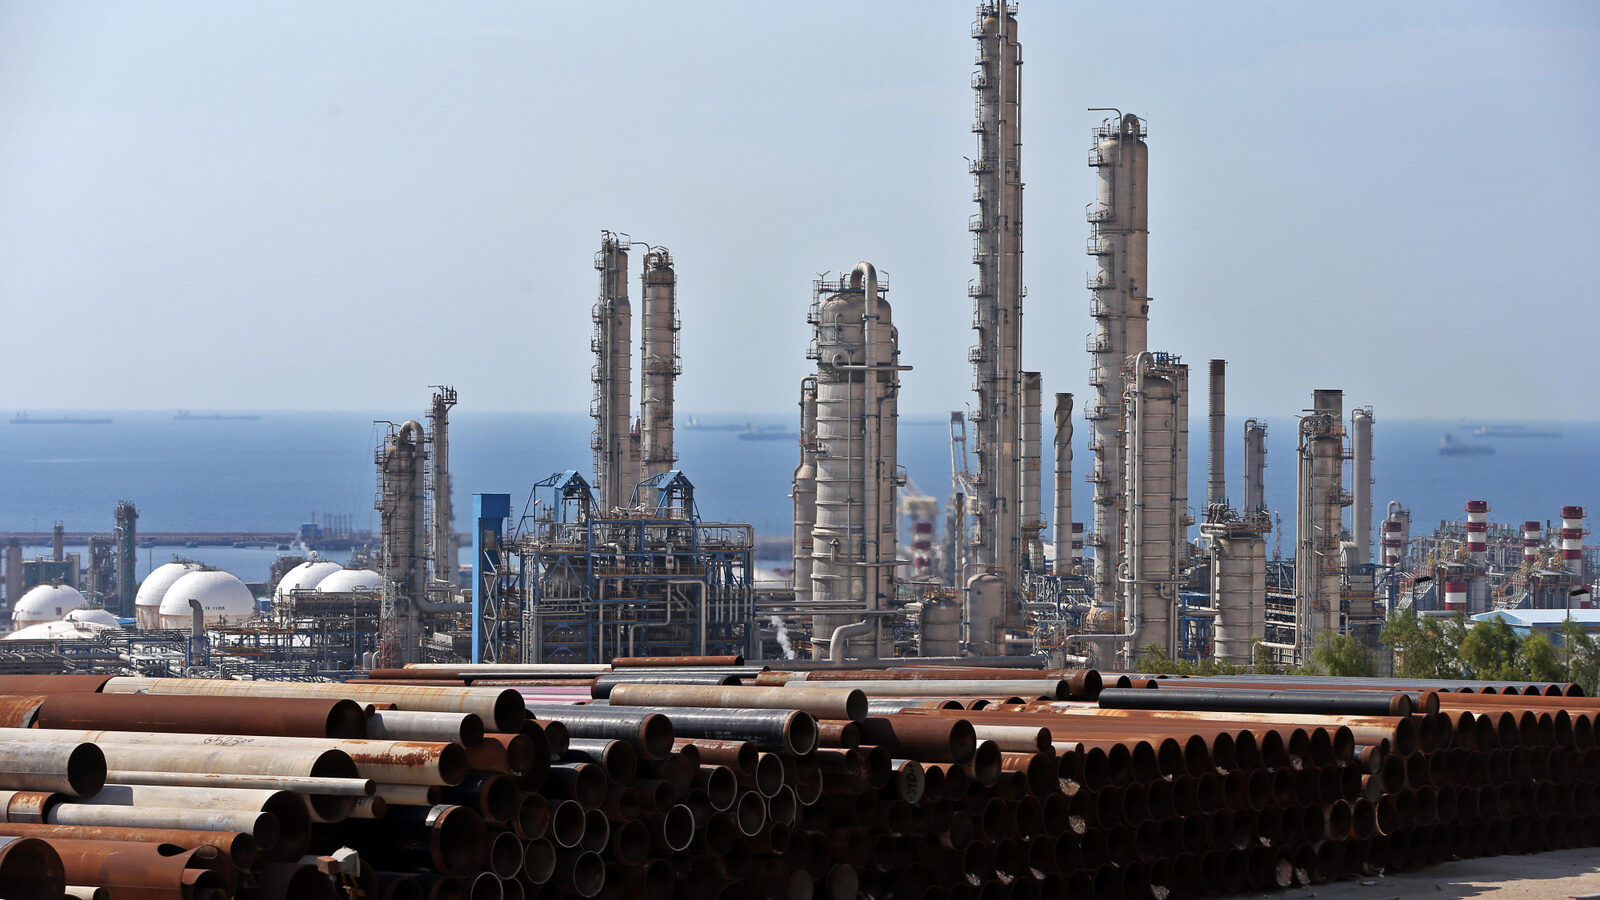 This Nov. 19, 2015 photo shows a general view of a petrochemical complex in the South Pars gas field in Asalouyeh, Iran, on the northern coast of Persian Gulf. Iran's oil Minister Bijan Zanganeh on Tuesday said Iran will host a summit of the world’s major gas producing countries Saturday. The meeting of the Gas Exporting Countries Forum (GECF) will bring major producers such as Russia, Qatar and Algeria to Iran, which itself is the world's third largest producer after the U.S. and Russia.